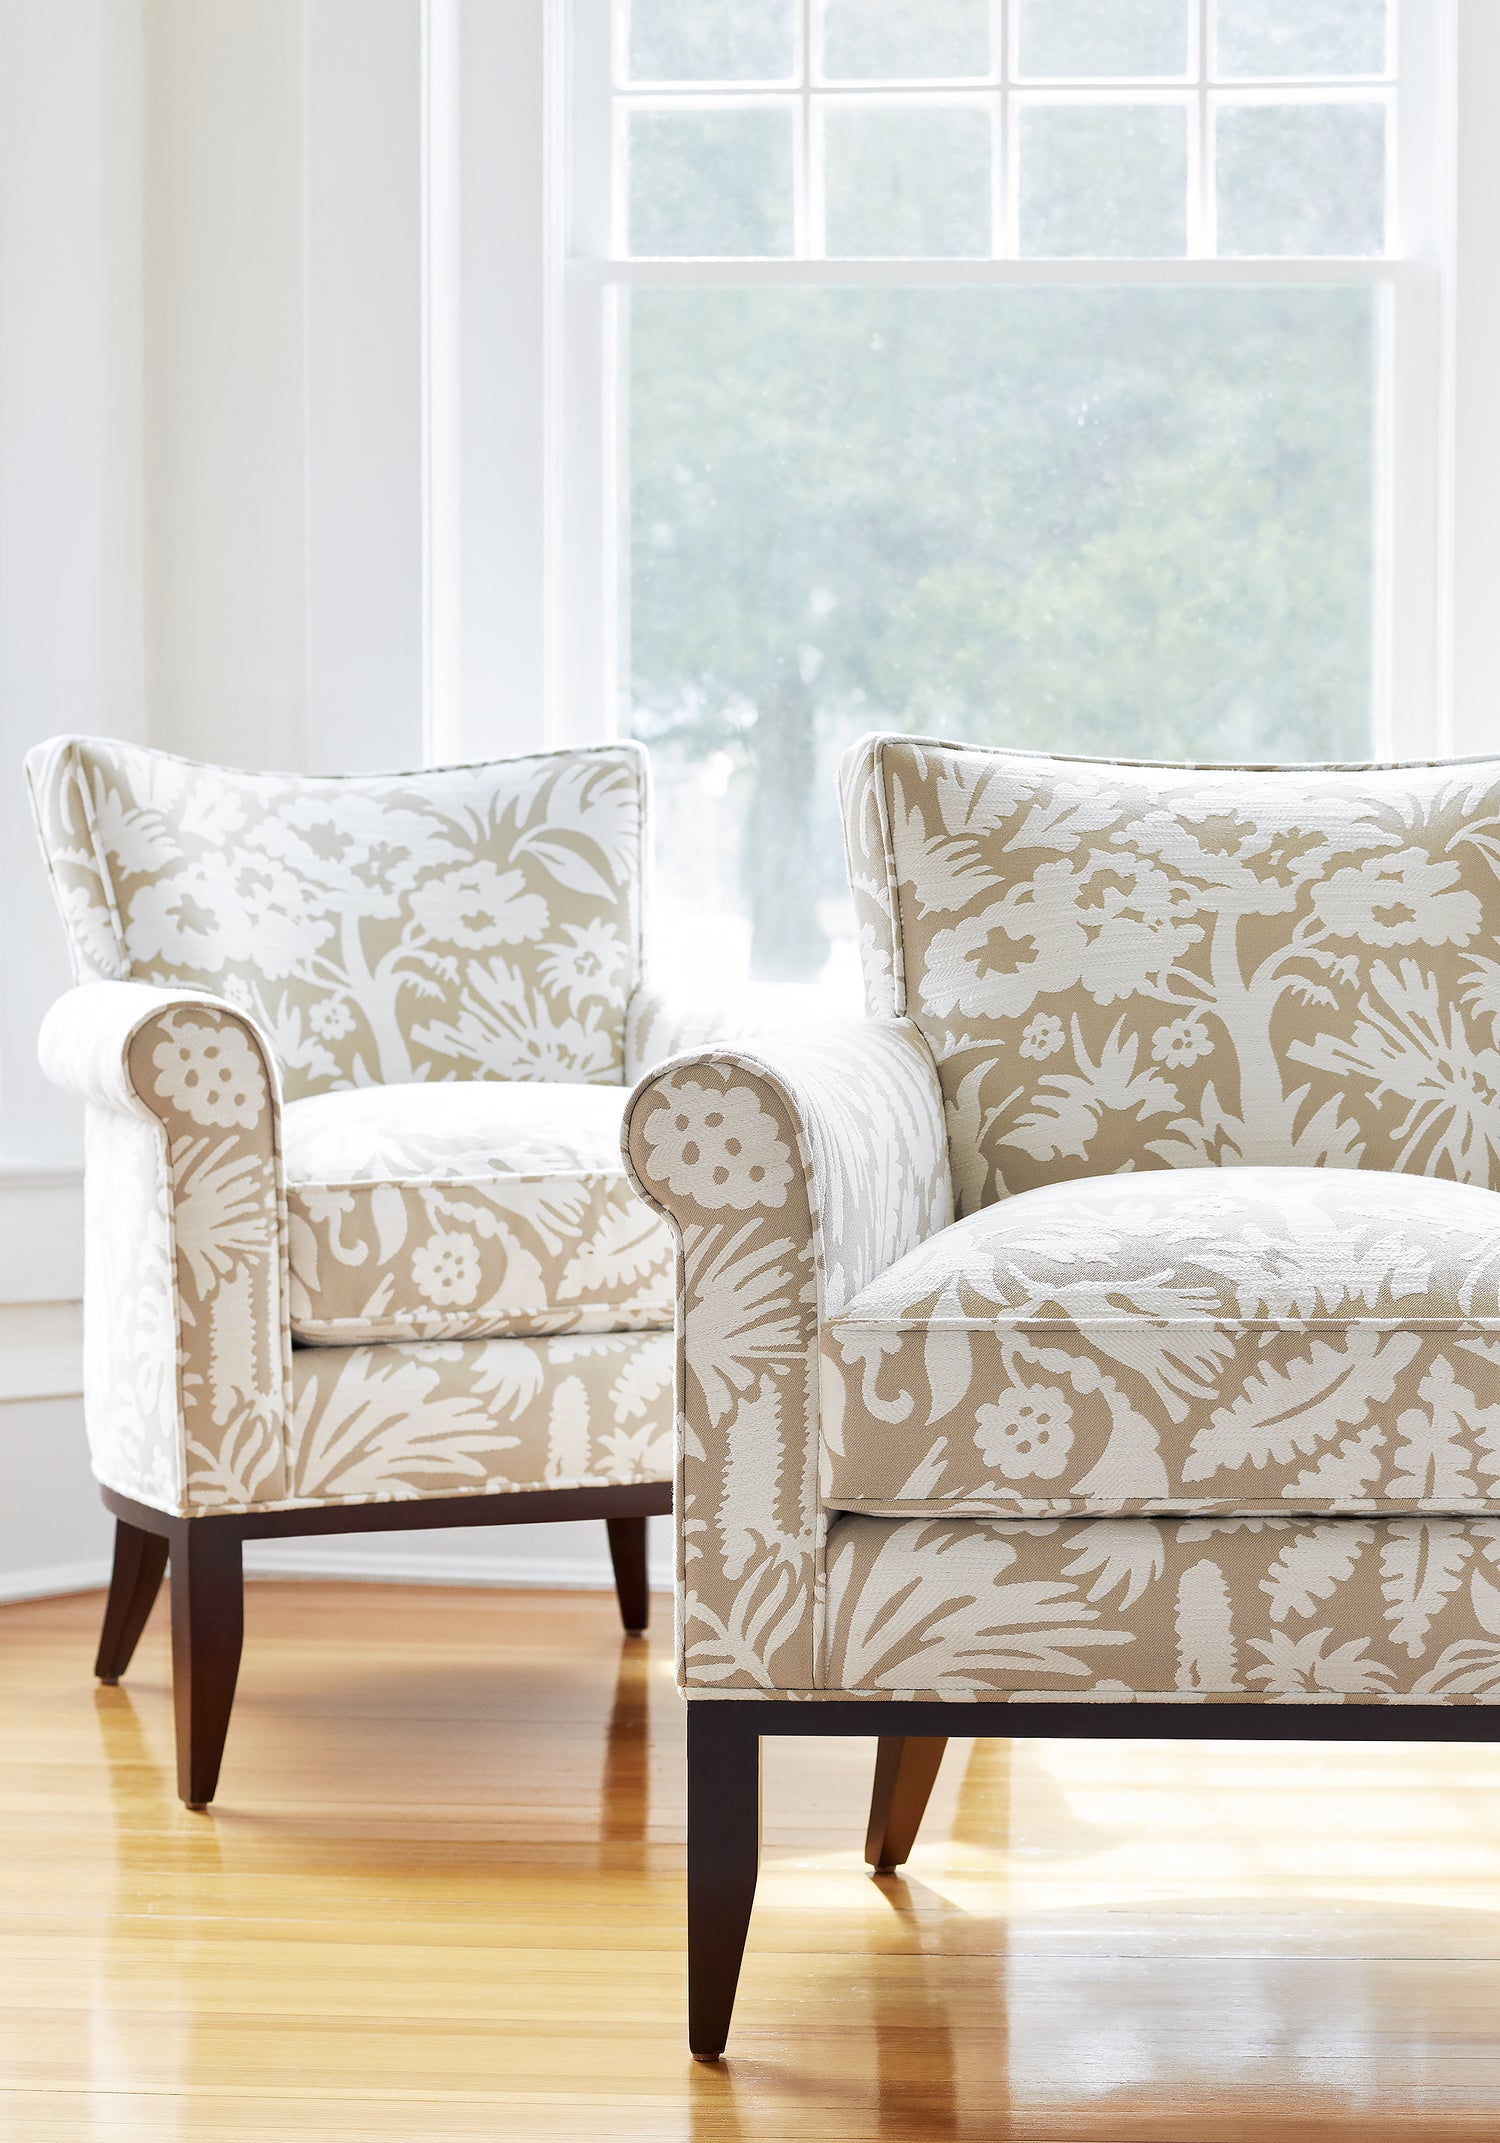 Winston Chairs in Botanica woven fabric in sand color - pattern number W74626 by Thibaut in the Festival collection